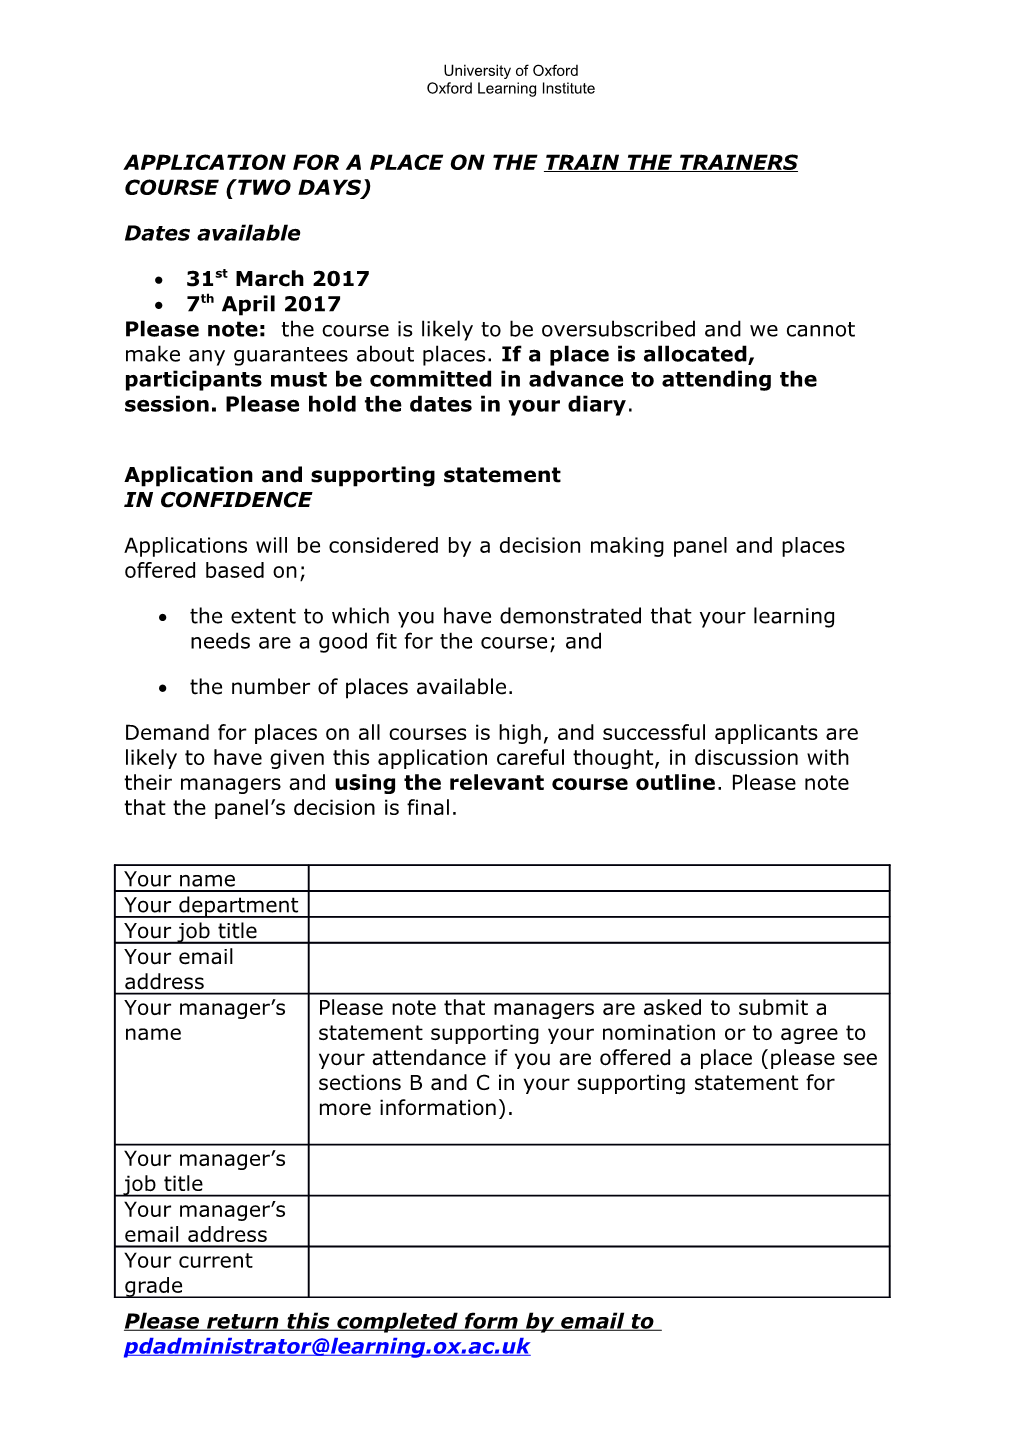 Application for a Place on the Train the Trainers Course (Two Days)